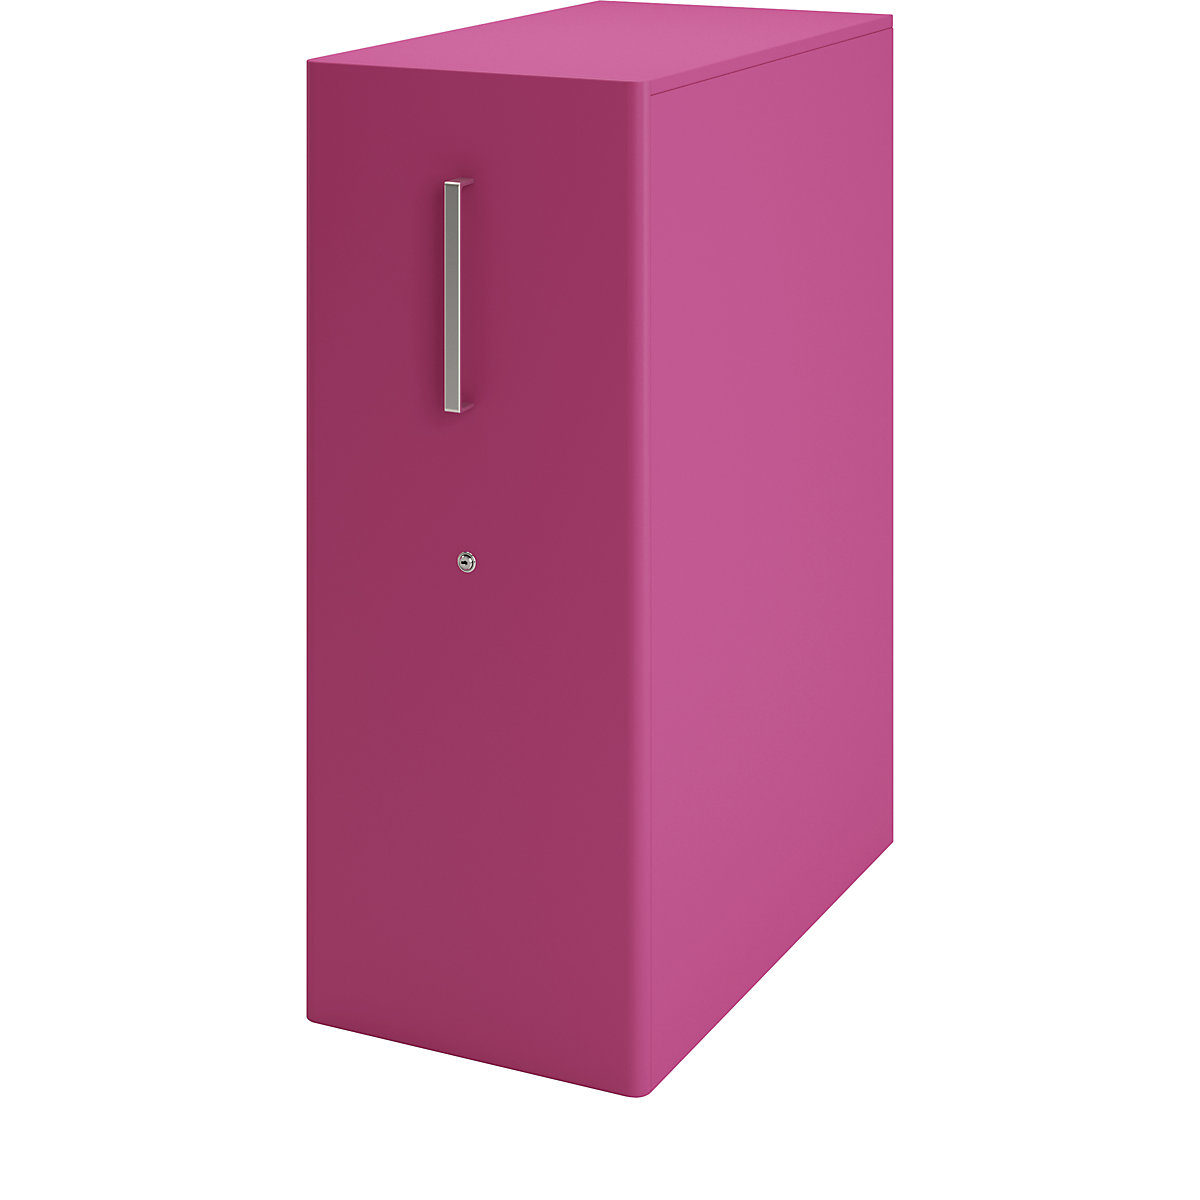 Tower™ 4 add-on furniture, with worktop, 1 pin board – BISLEY, for the right side, 1 shelf, fuchsia-25